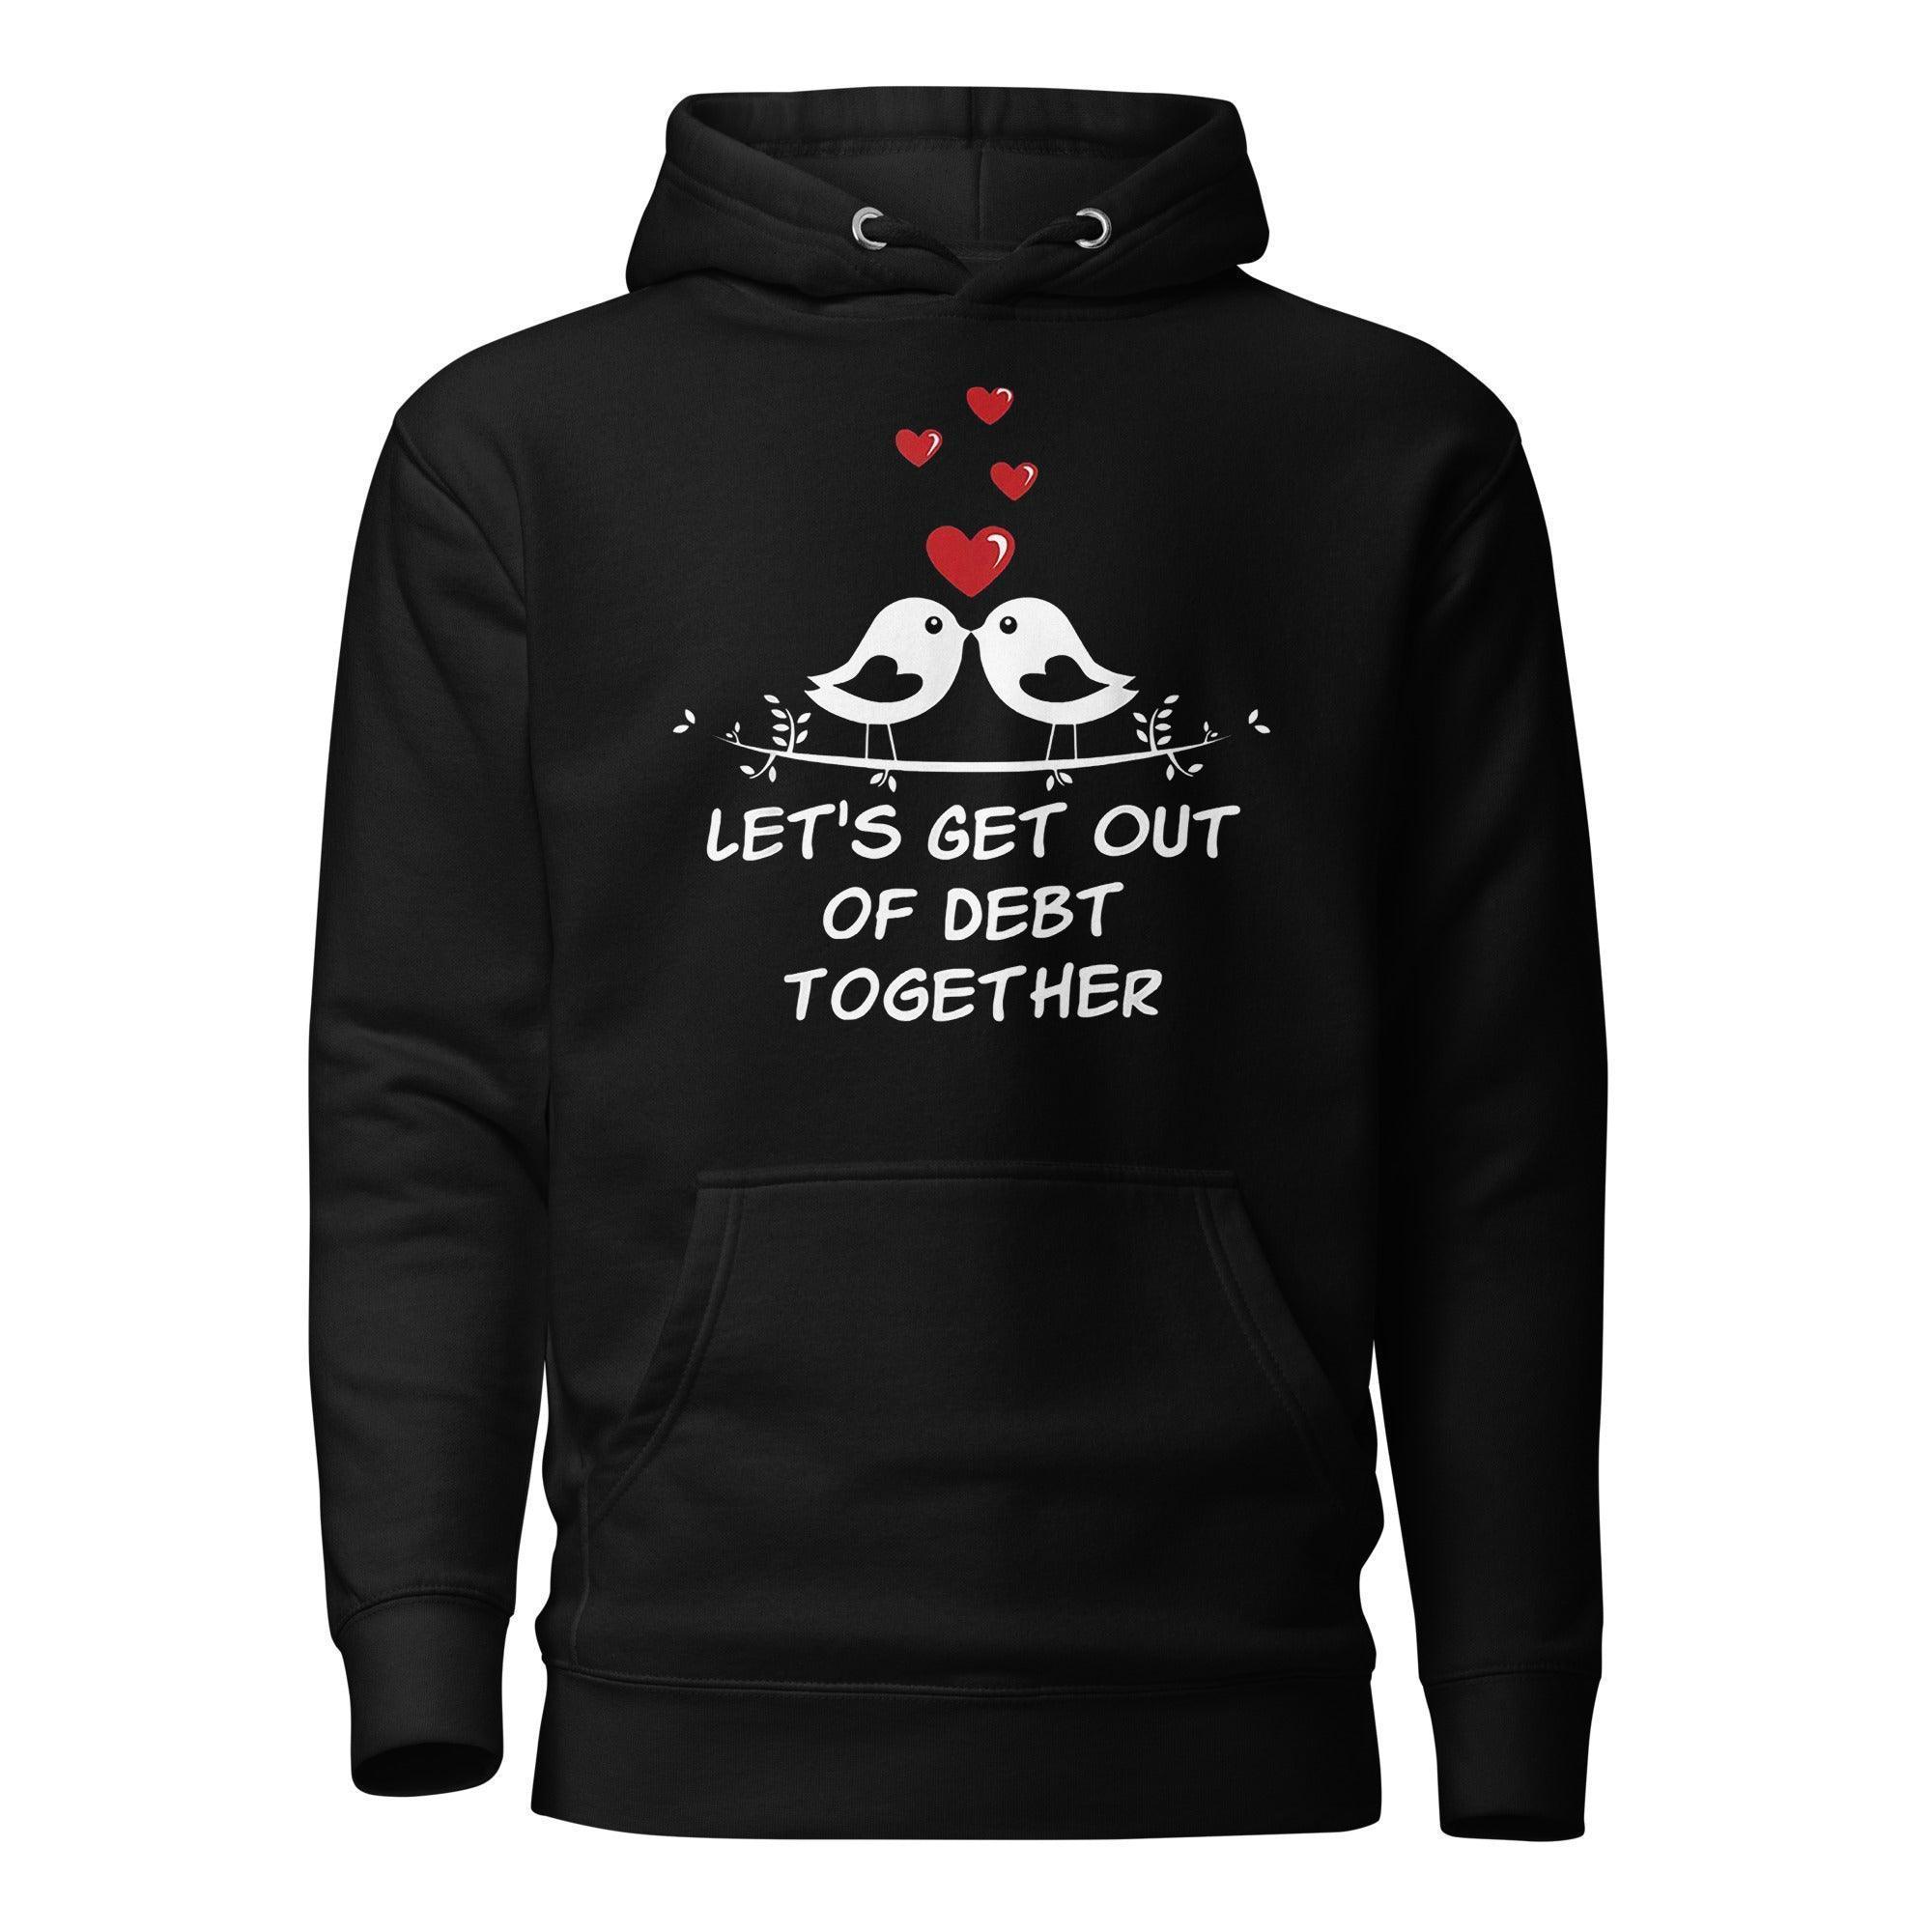 Get Out of Debt Together Pullover Hoodie - InvestmenTees